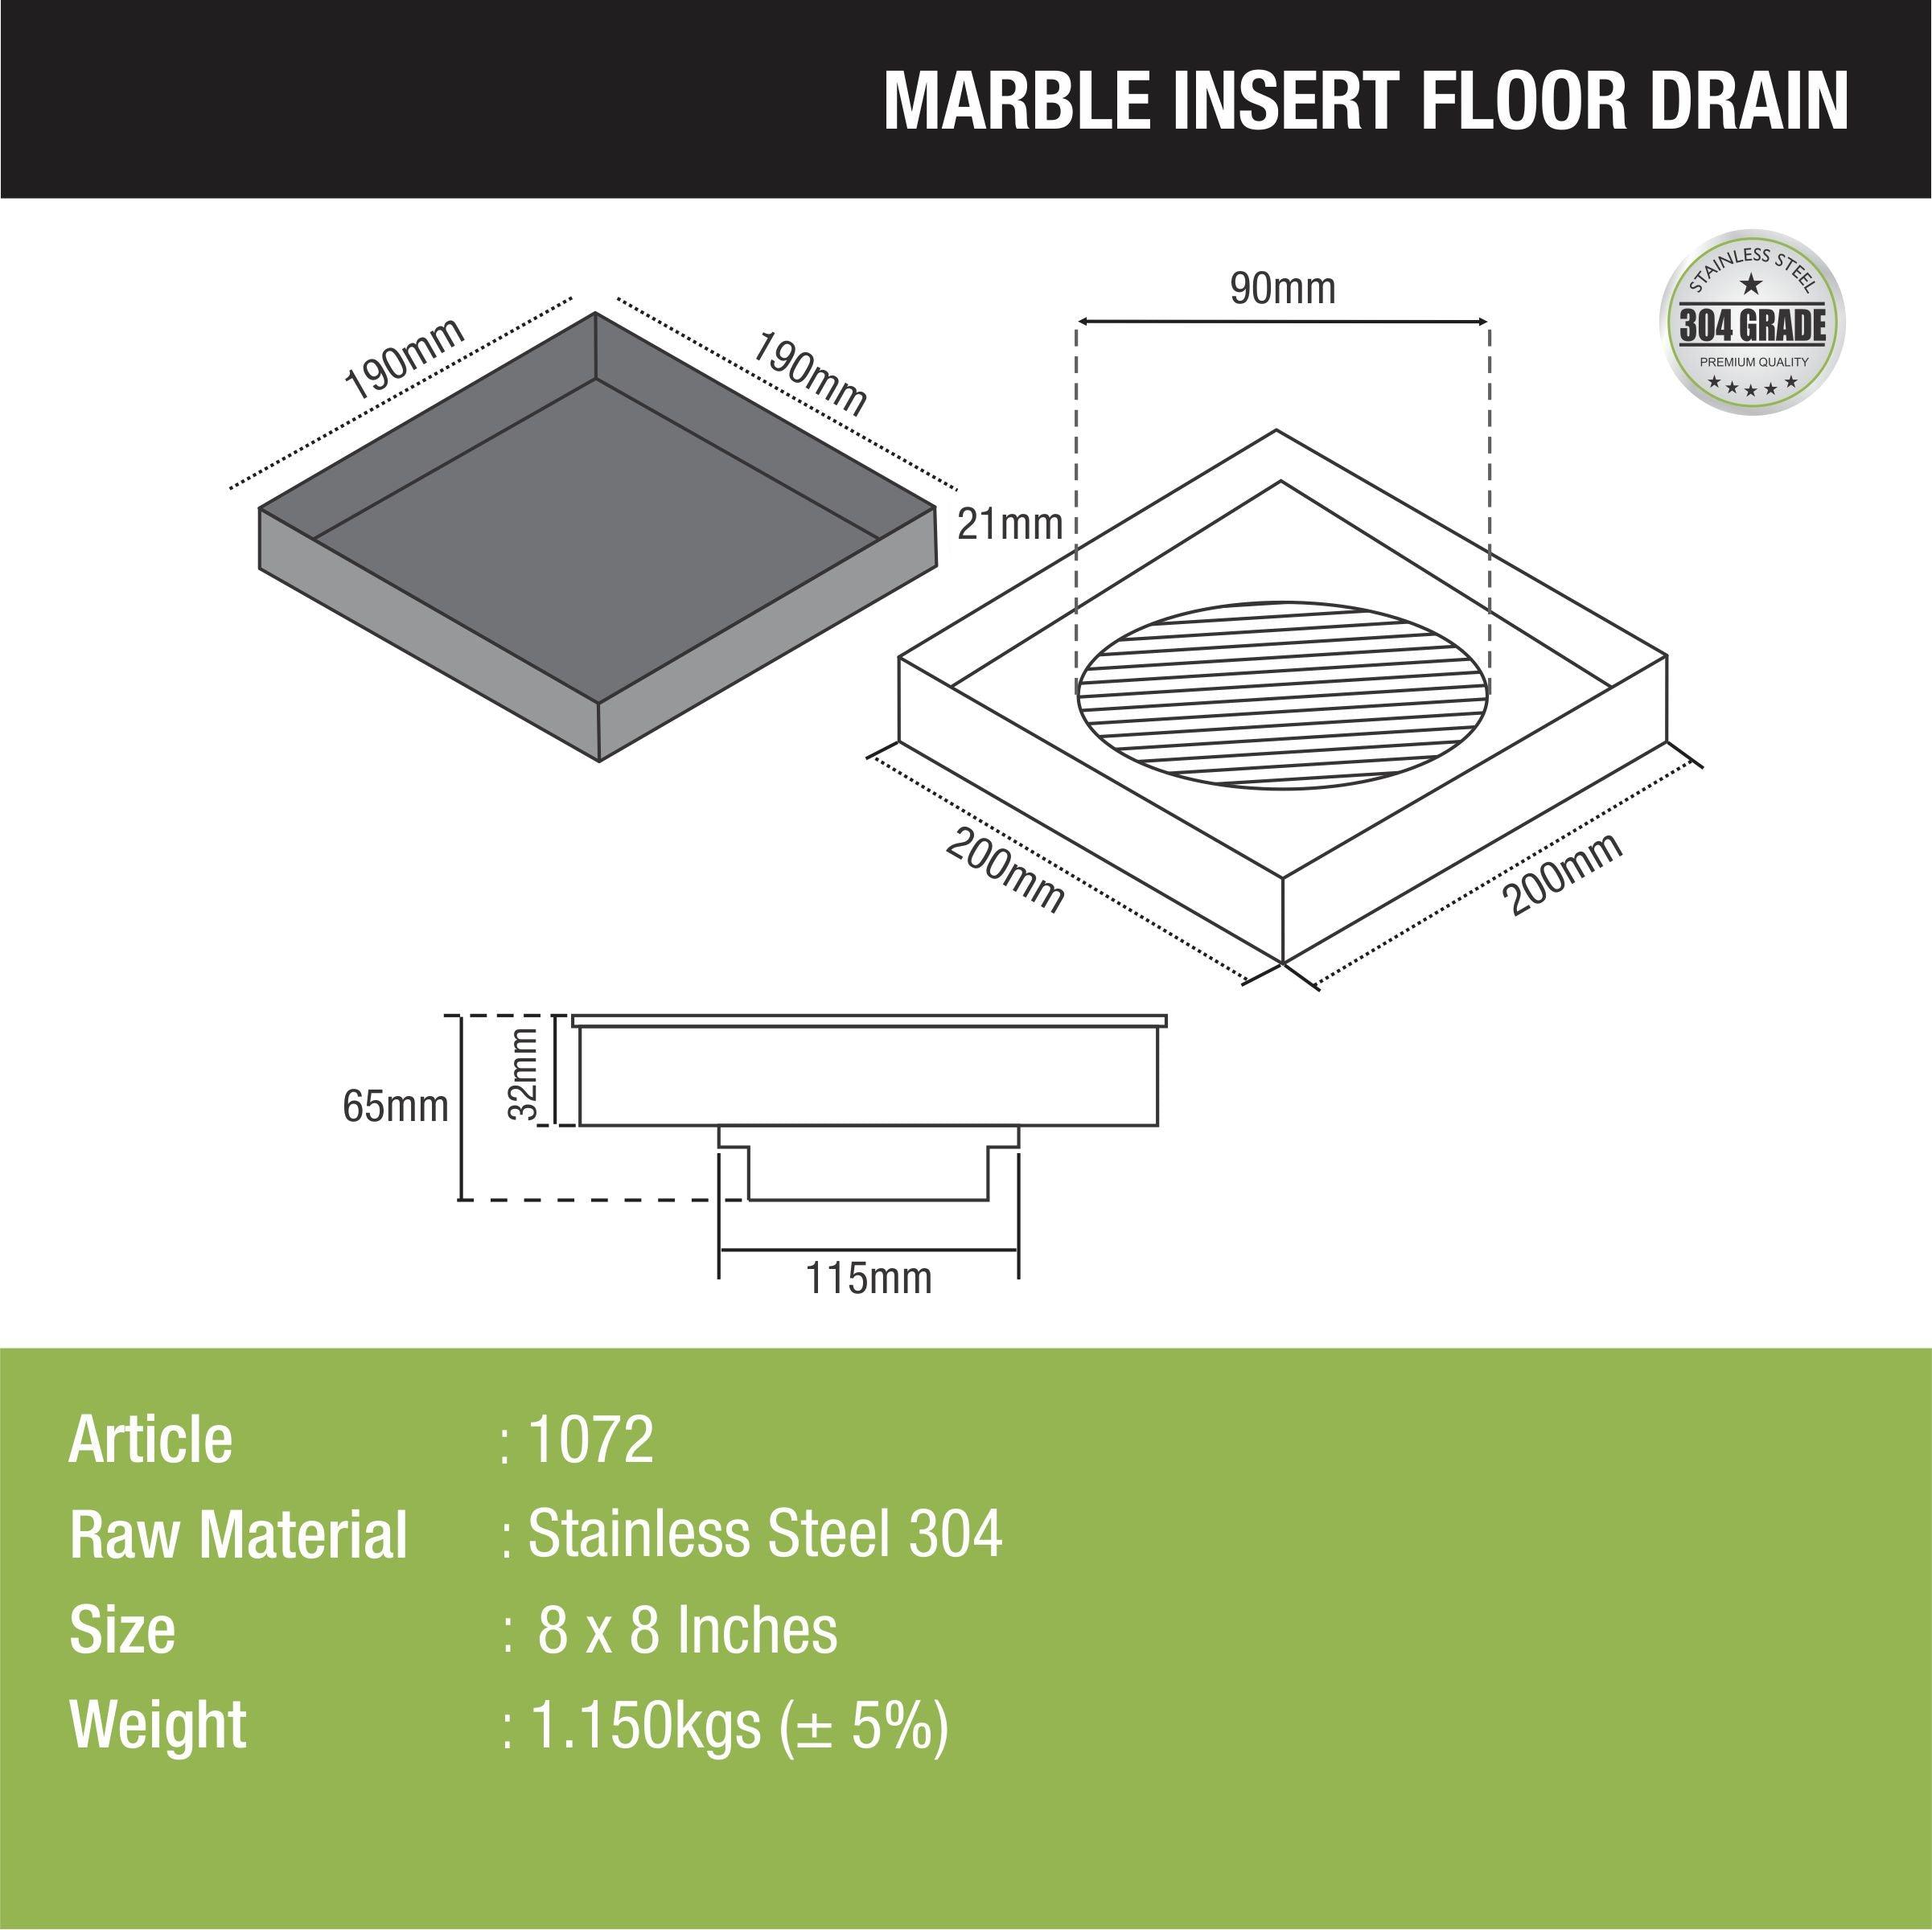 Marble Insert Floor Drain (8 x 8 Inches) dimensions and sizes